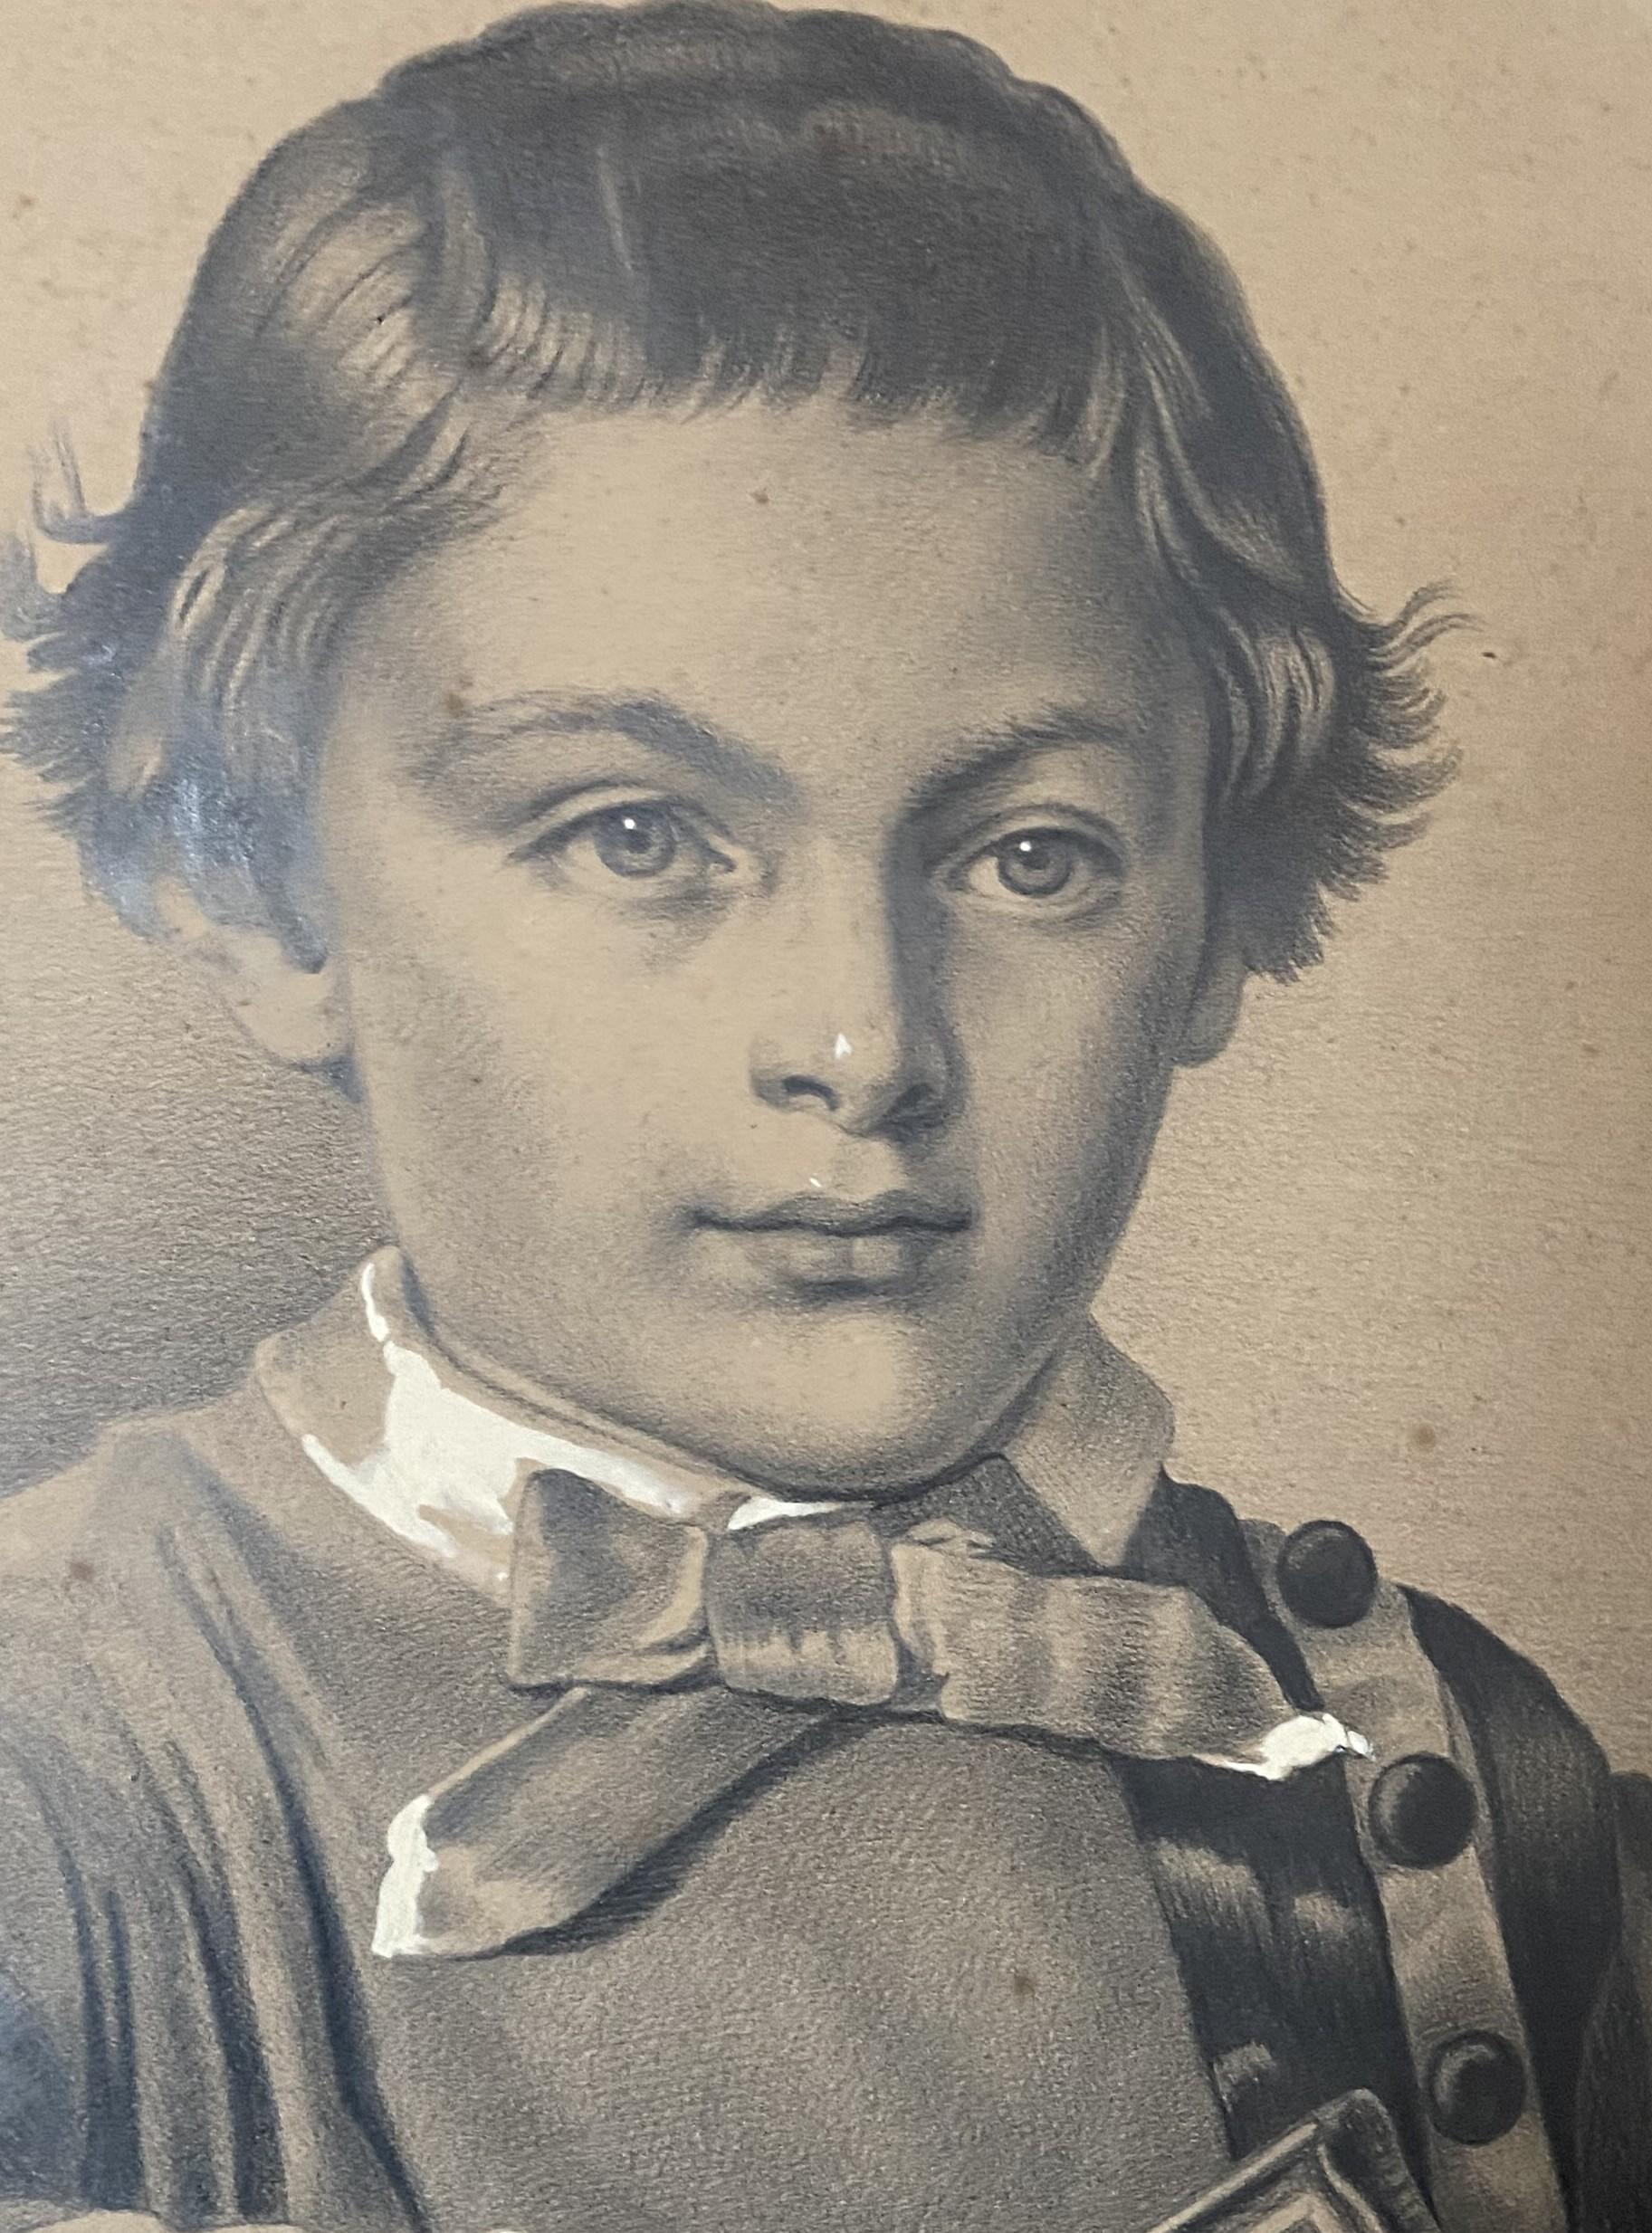 French school circa 1880
Portrait of a boy holding a book
graphite and white gouache on paper
39.5 x 32 cm oval view
in good condition, slightly yellowed with age
In its original oval frame and mount, numerous stains and foxing. 
The back of the